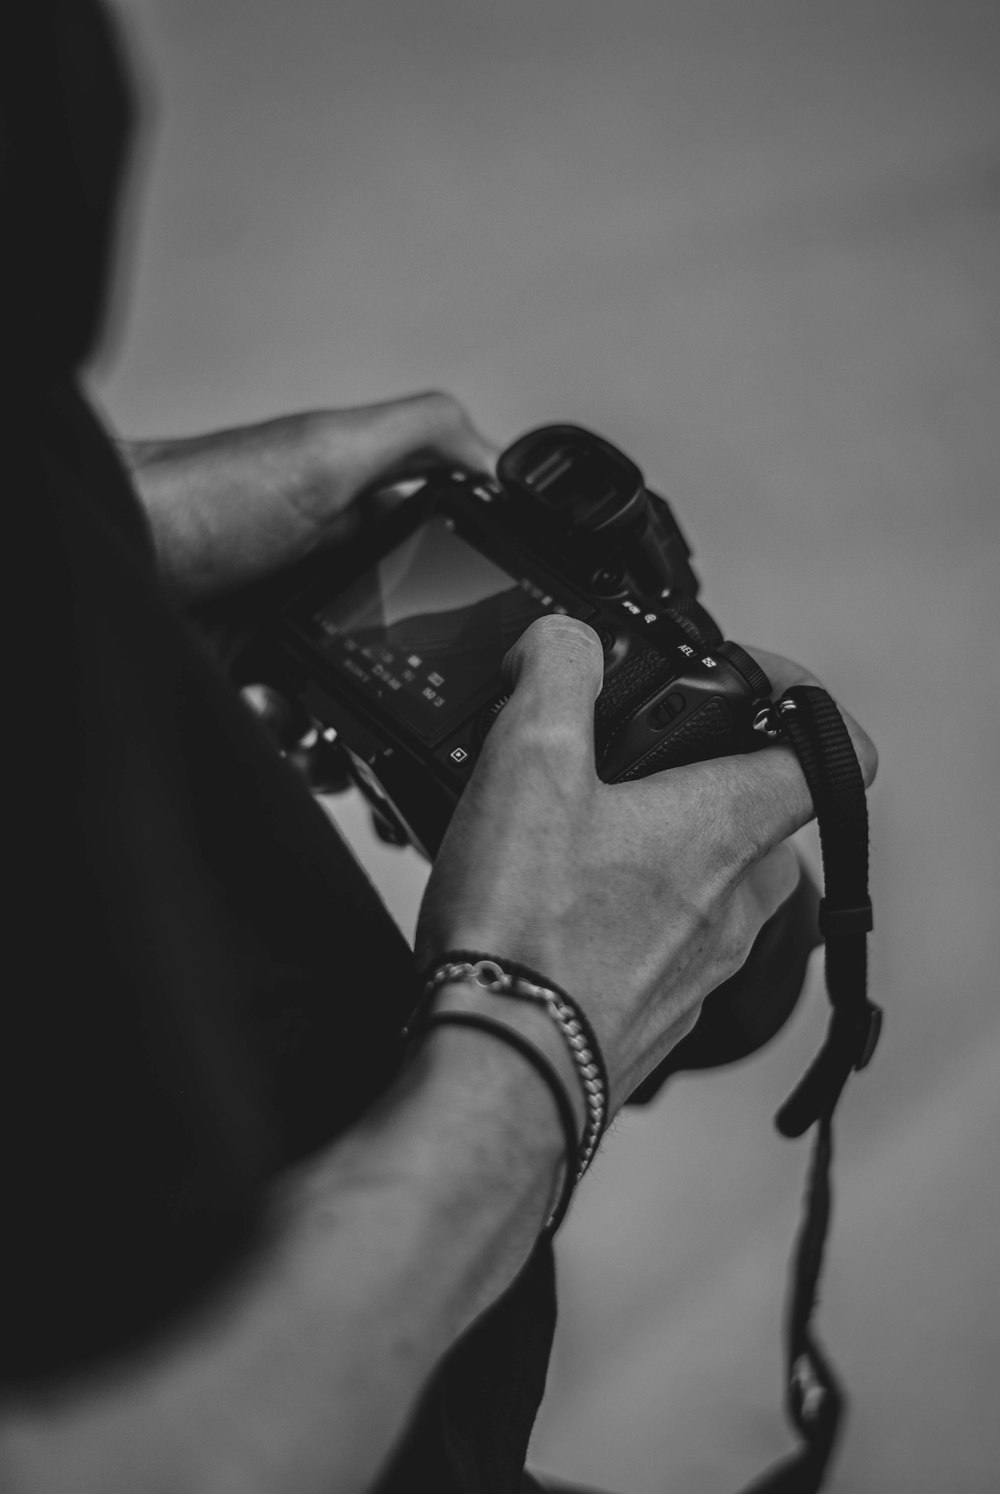 grayscale photo of person wearing black watch and black dslr camera